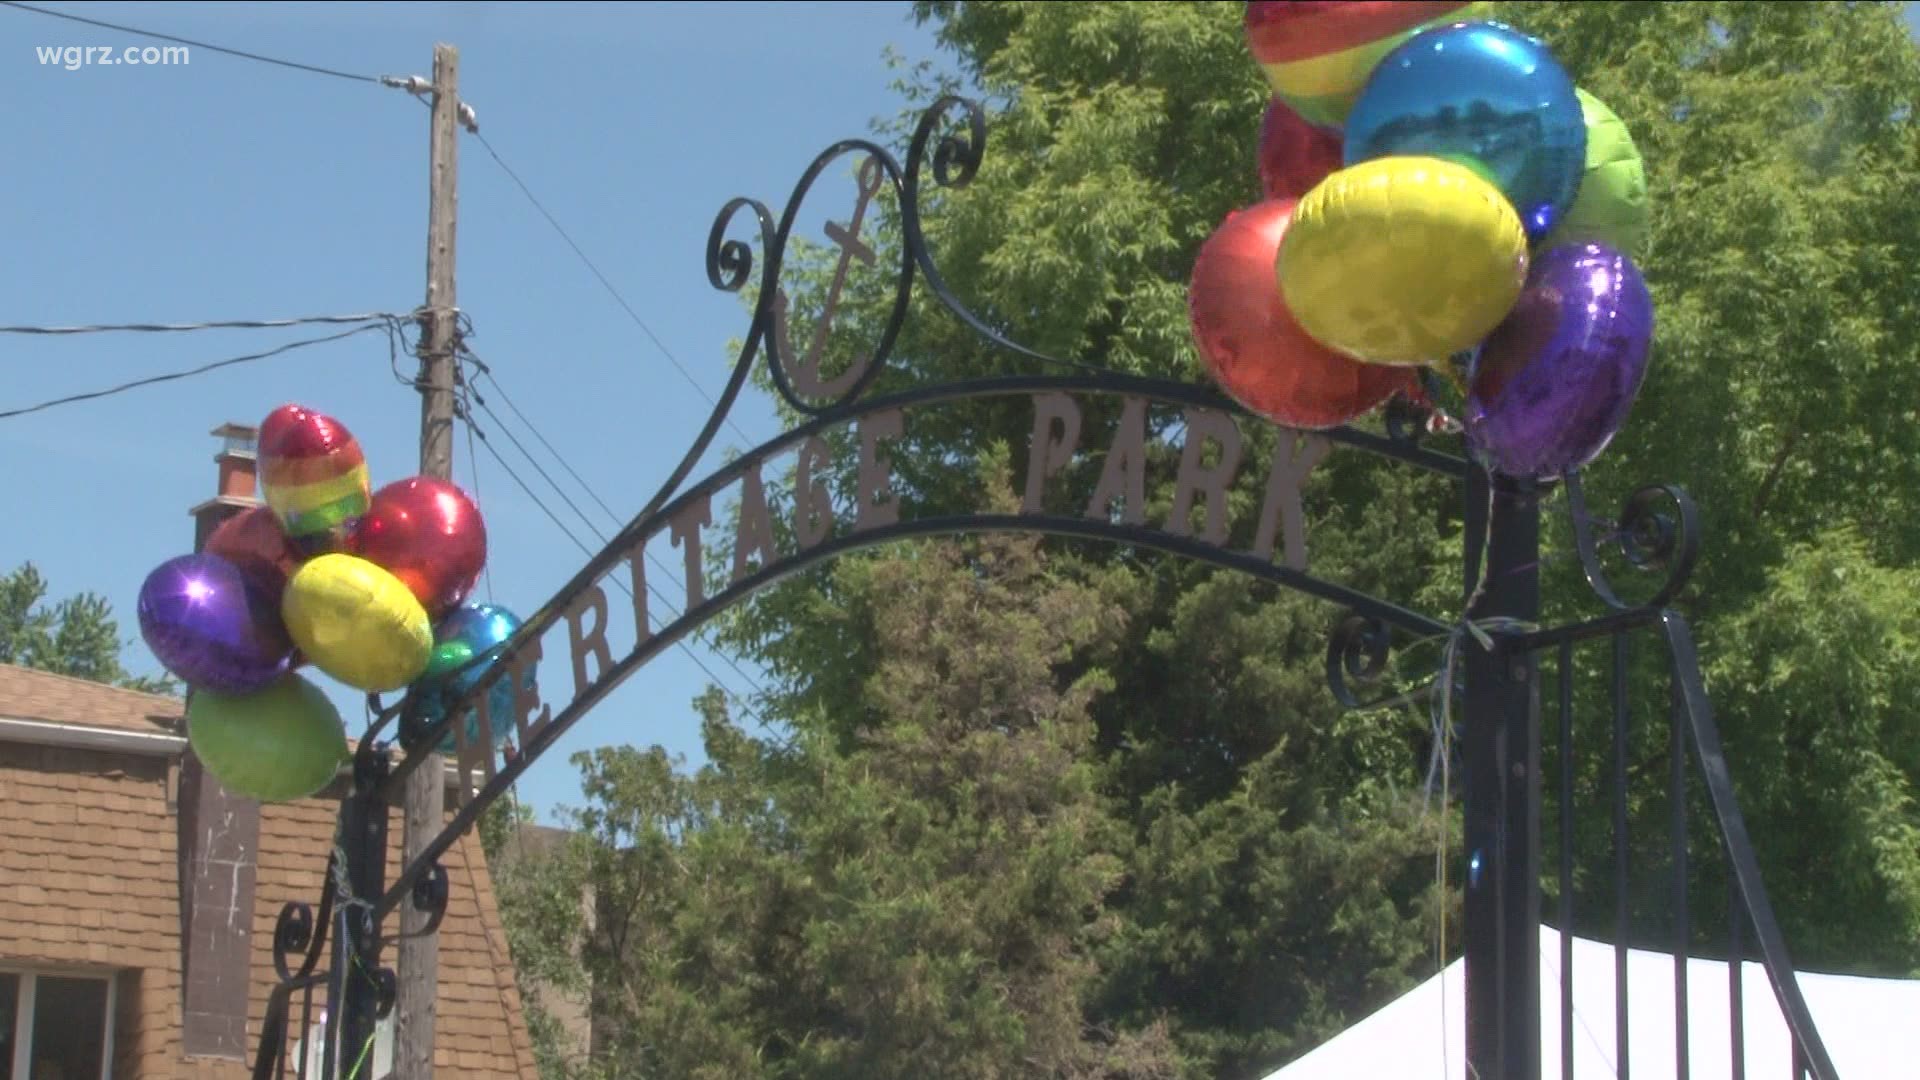 Pride month continues and today the Oliver Street Merchants Association hosted a "Shop with Pride" event at Heritage Park up in North Tonawanda.